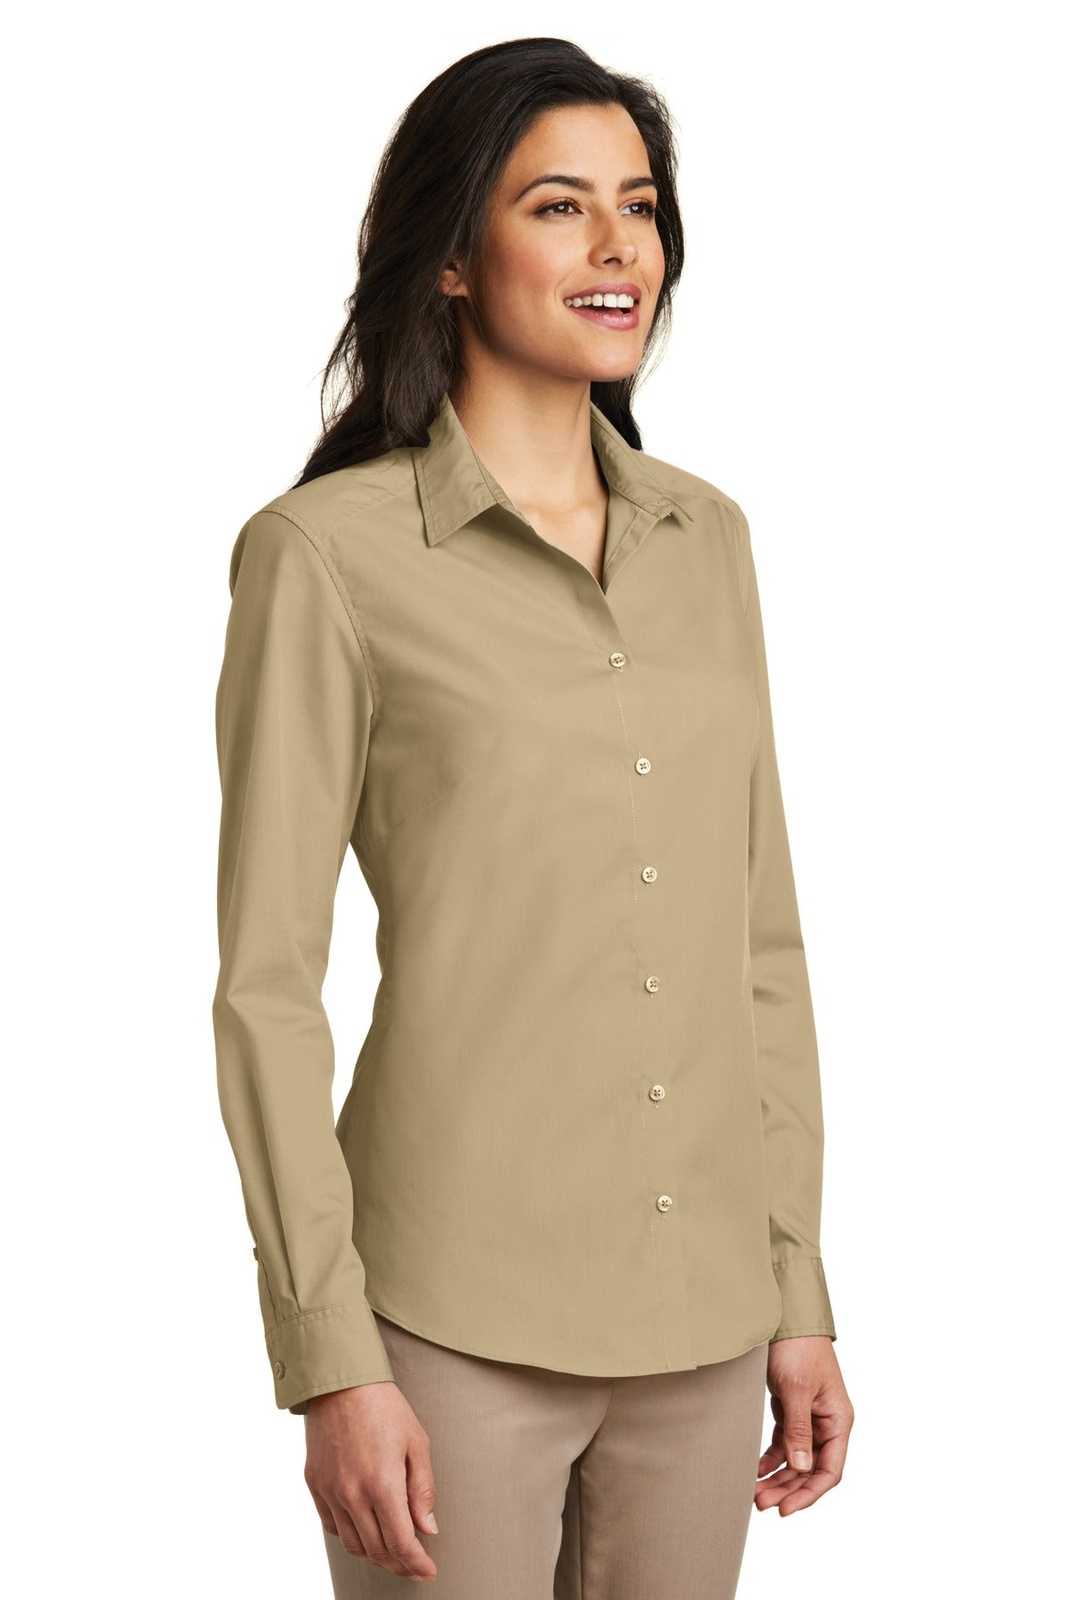 Port Authority LW100 Ladies Long Sleeve Carefree Poplin Shirt - Wheat - HIT a Double - 4